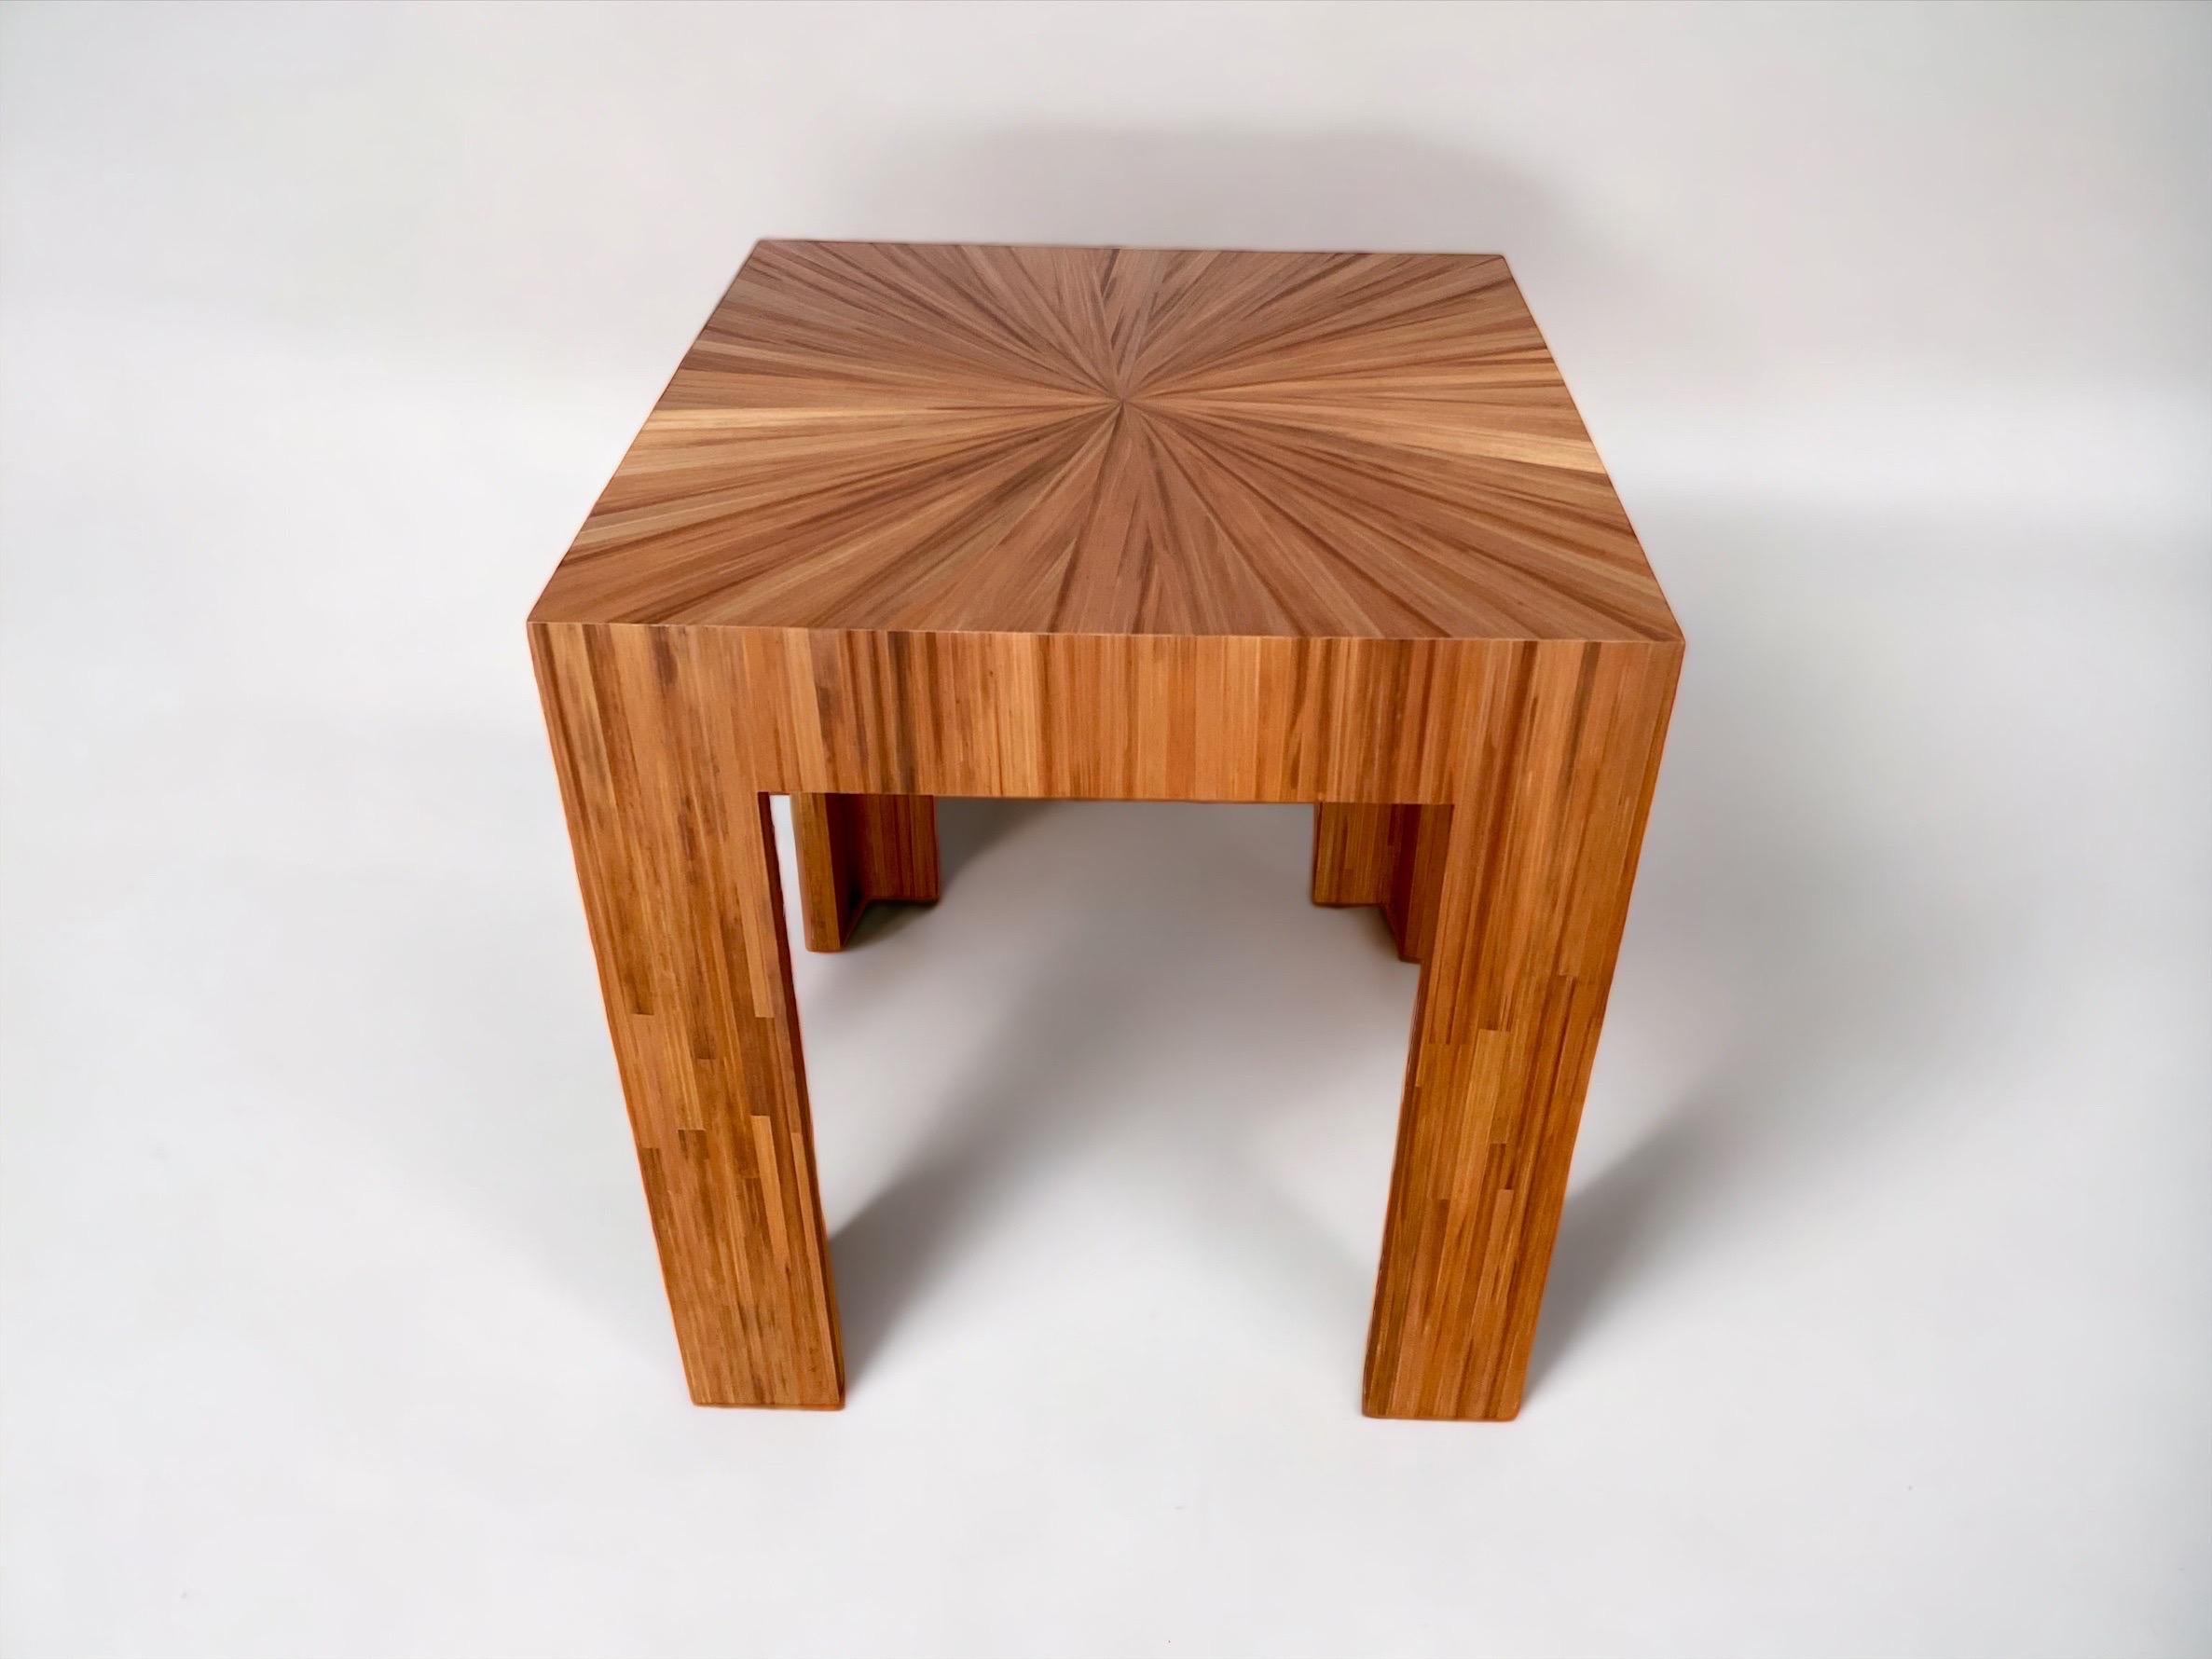 Jean-Michel Frank designs are prized for their serene and simple beauty. Available in more than 60 colors in straw marquetry motif, this striking side table showcases the nuanced hues and textures achieved through Frank’s precision in technique and